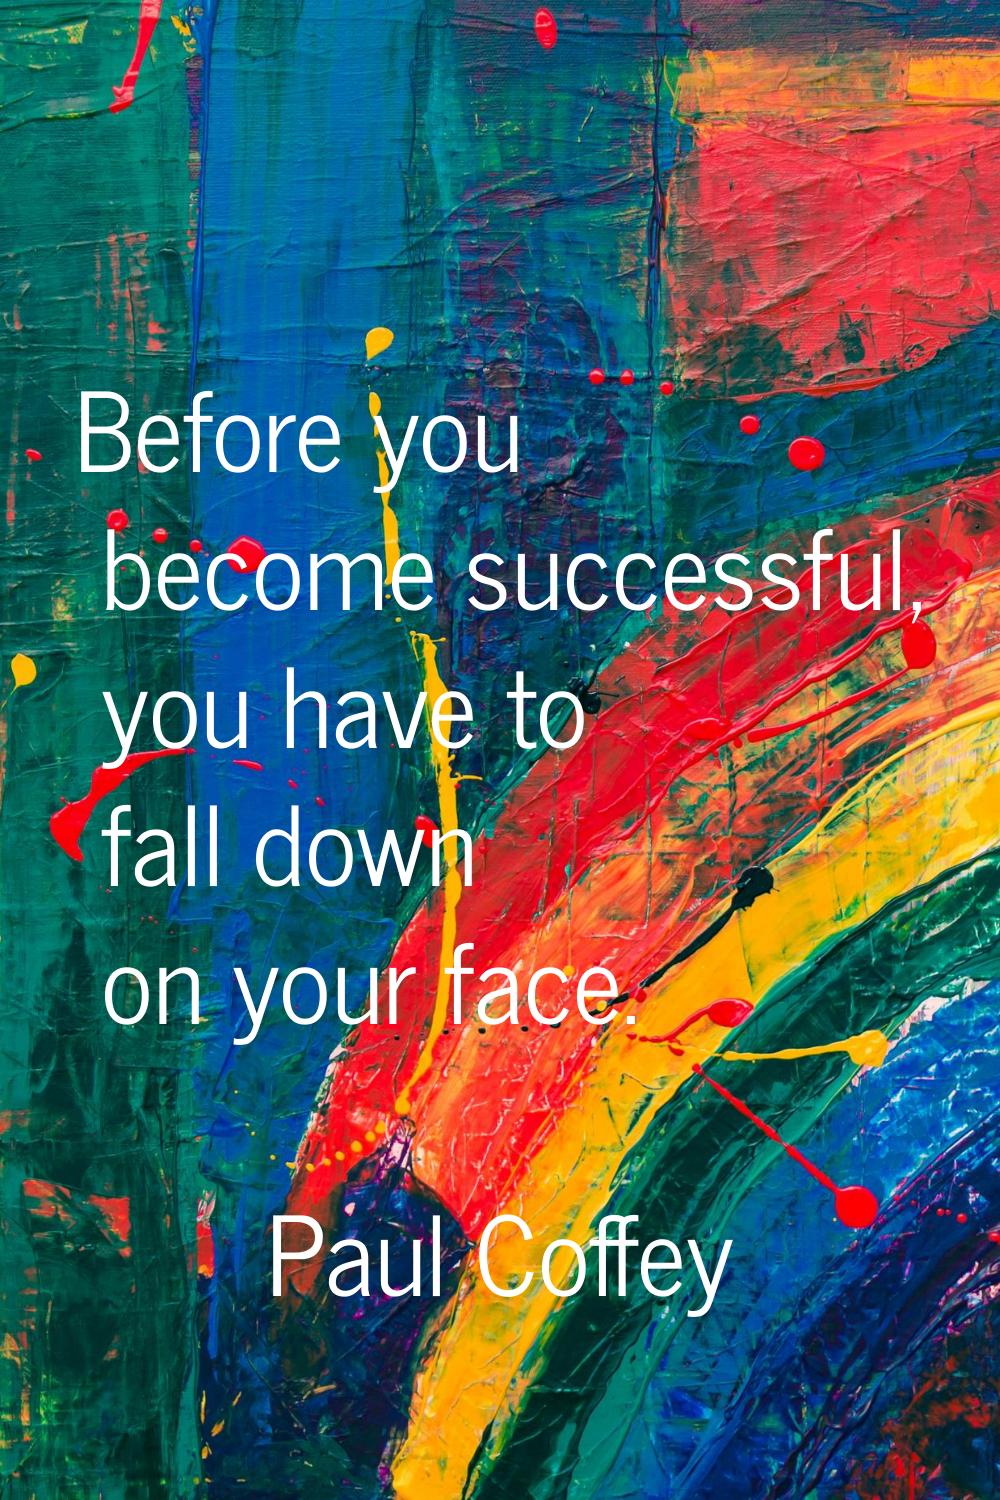 Before you become successful, you have to fall down on your face.